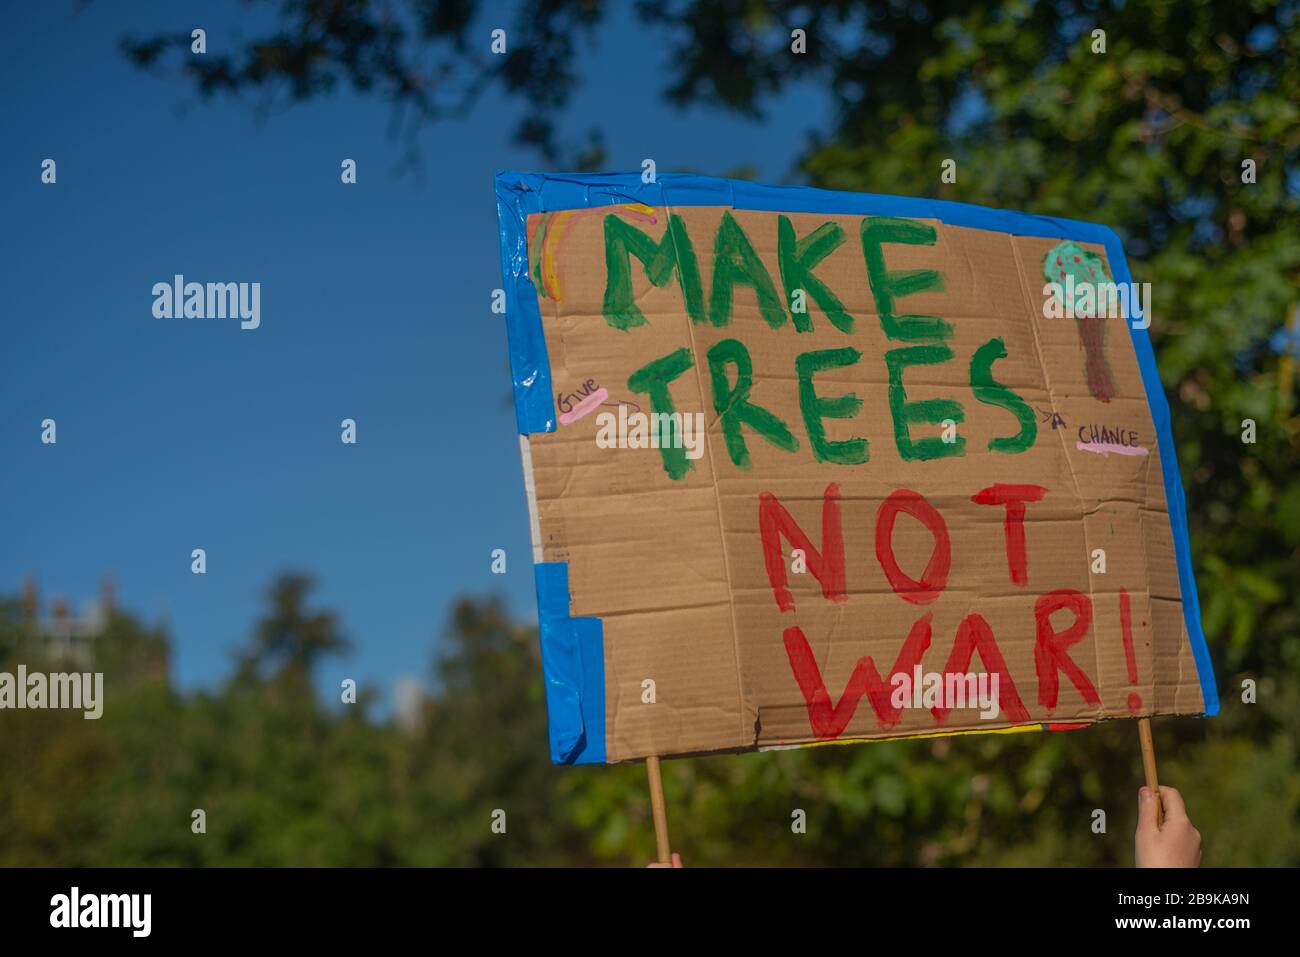 Home Made Banner at a Climate Strike Protest March Stock Photo